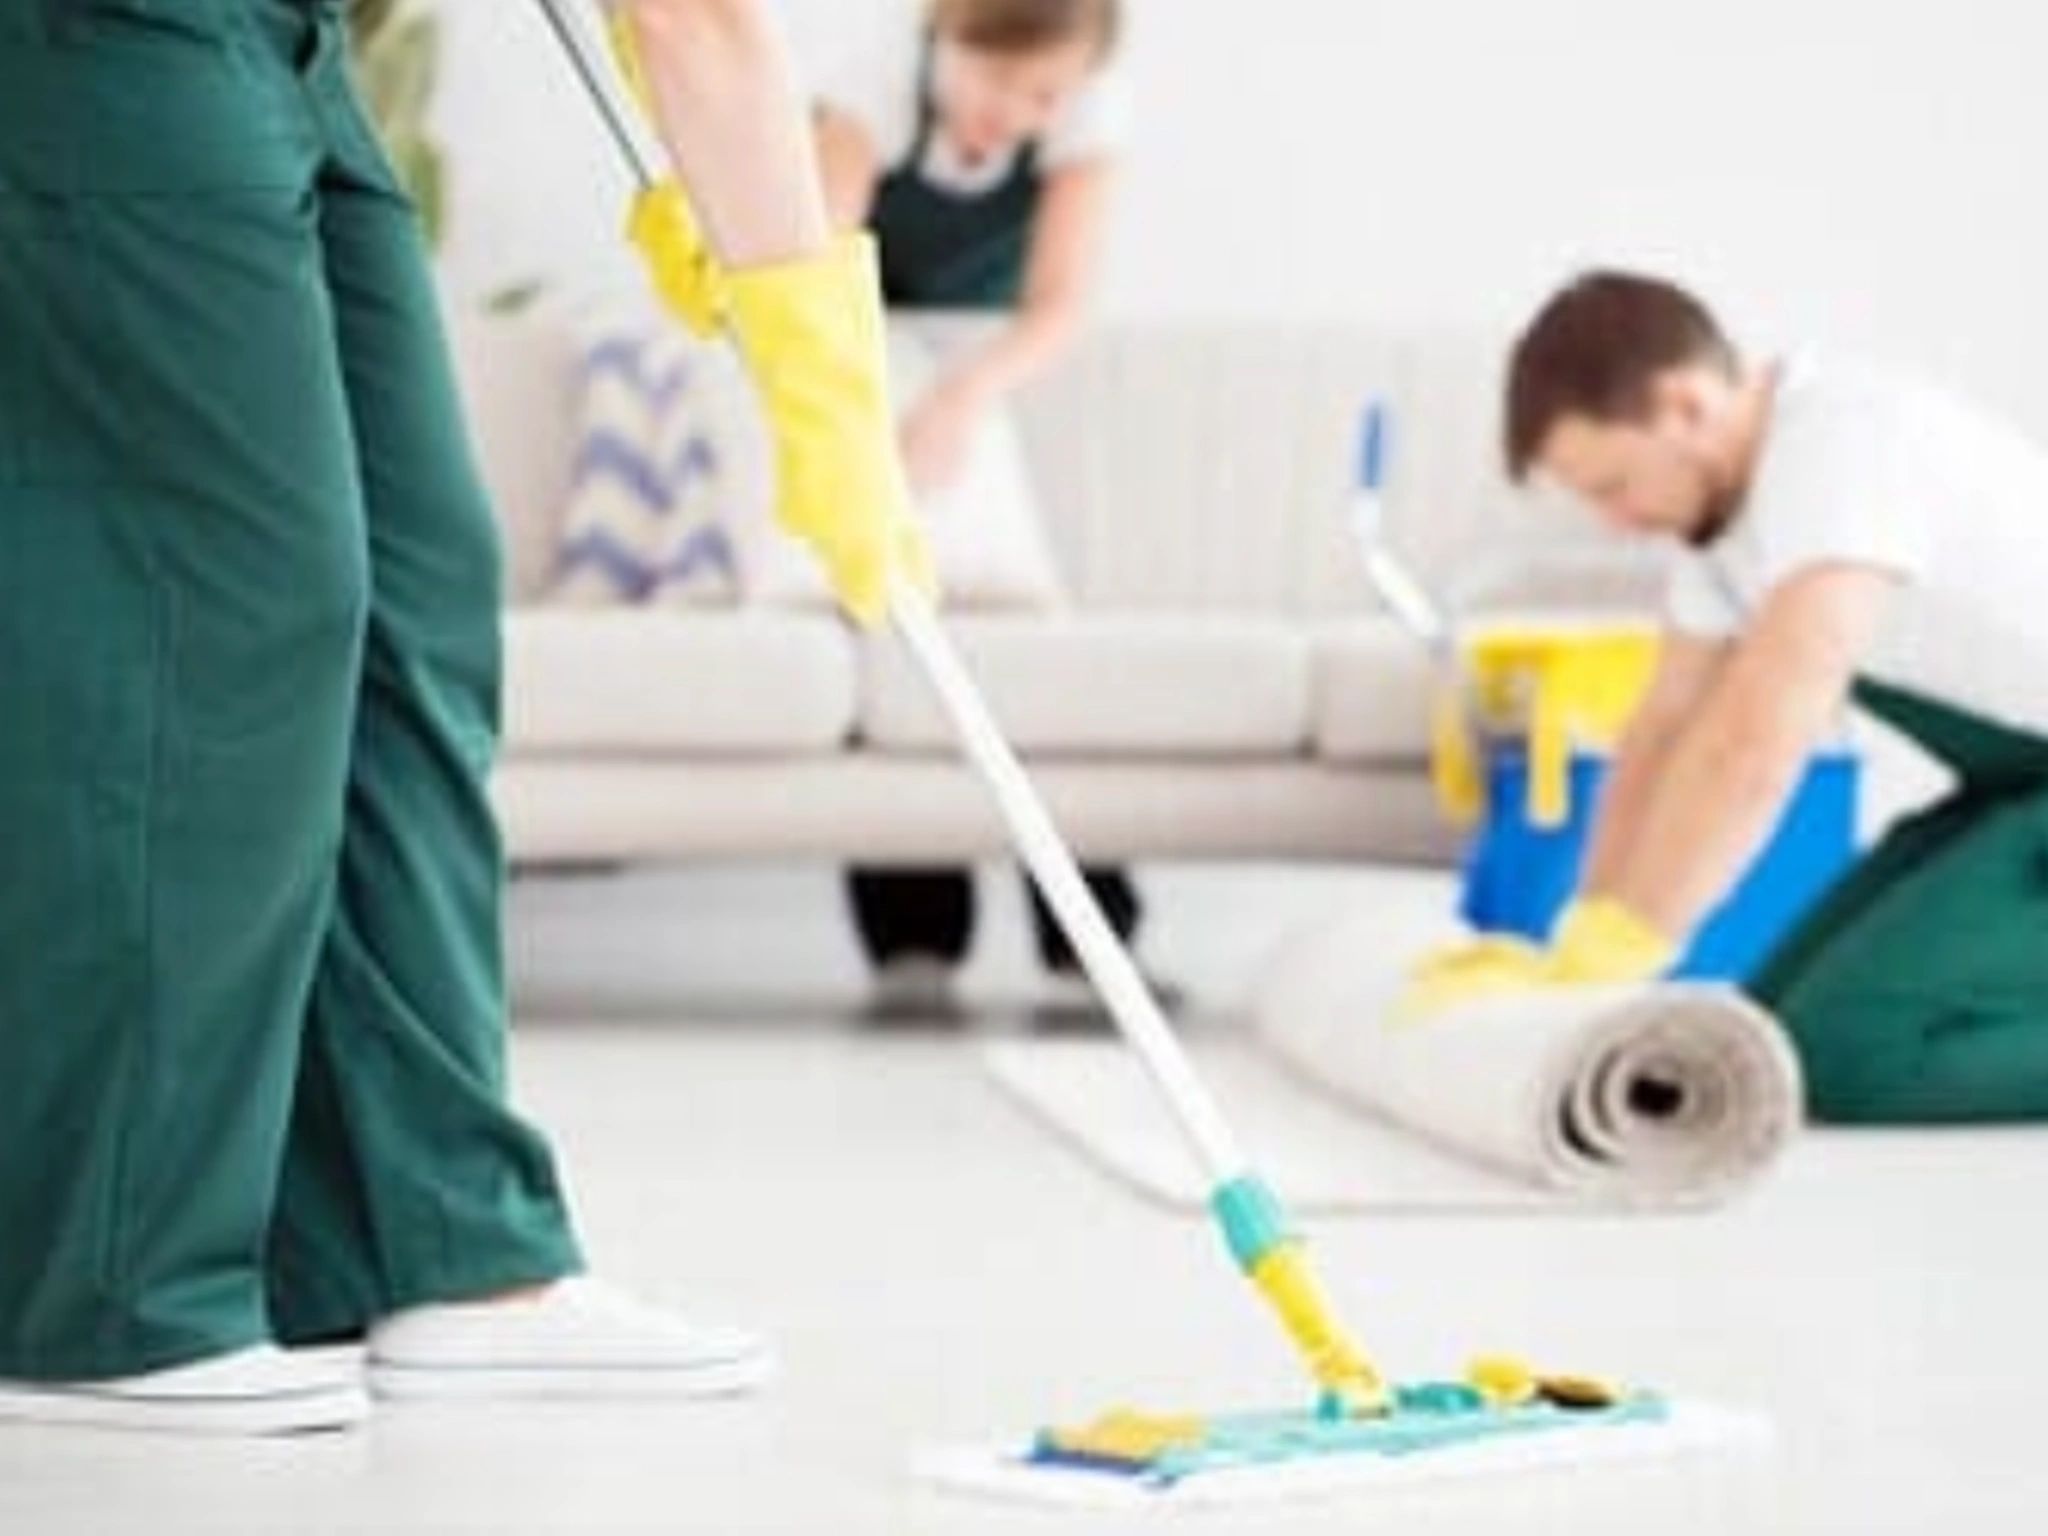 Full cleaning lv -  Las Vegas, NV House Cleaning Service